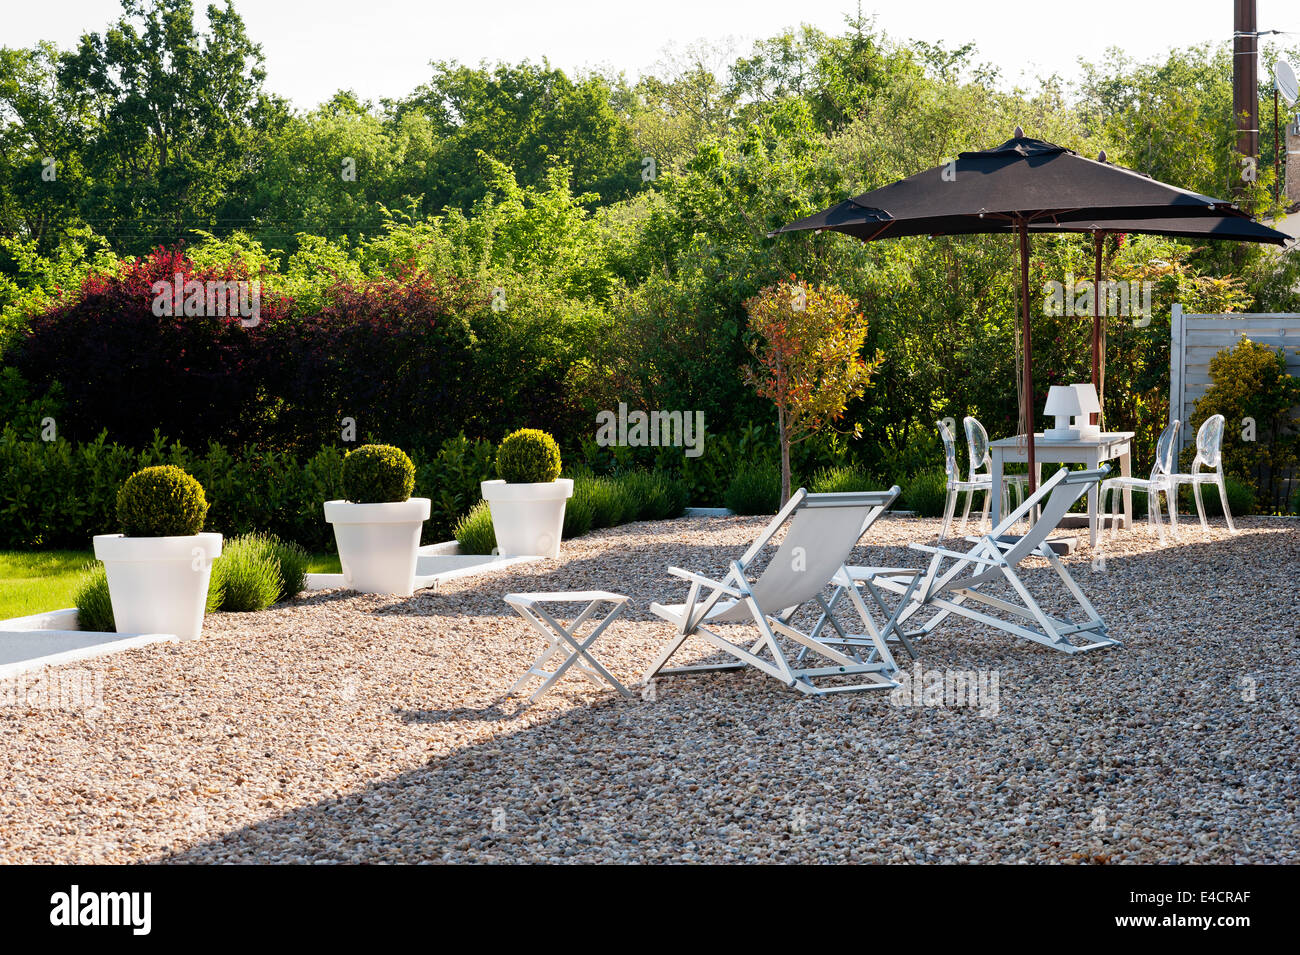 Deck chairs and parasols on gravel terrace Stock Photo